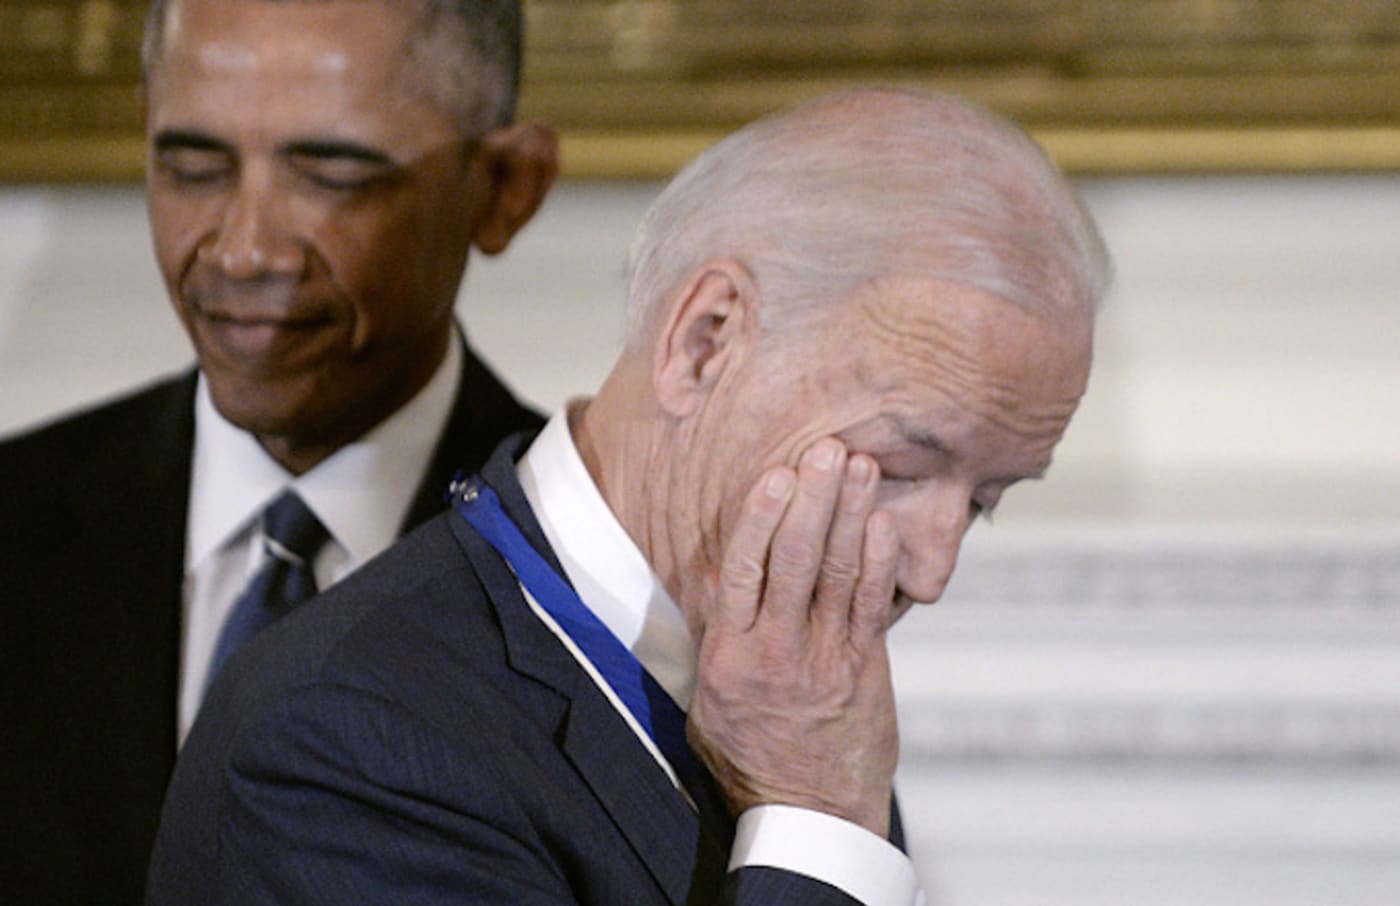 Vice President Joe Biden wipes his eyes after Obama presented him with Medal of Freedom